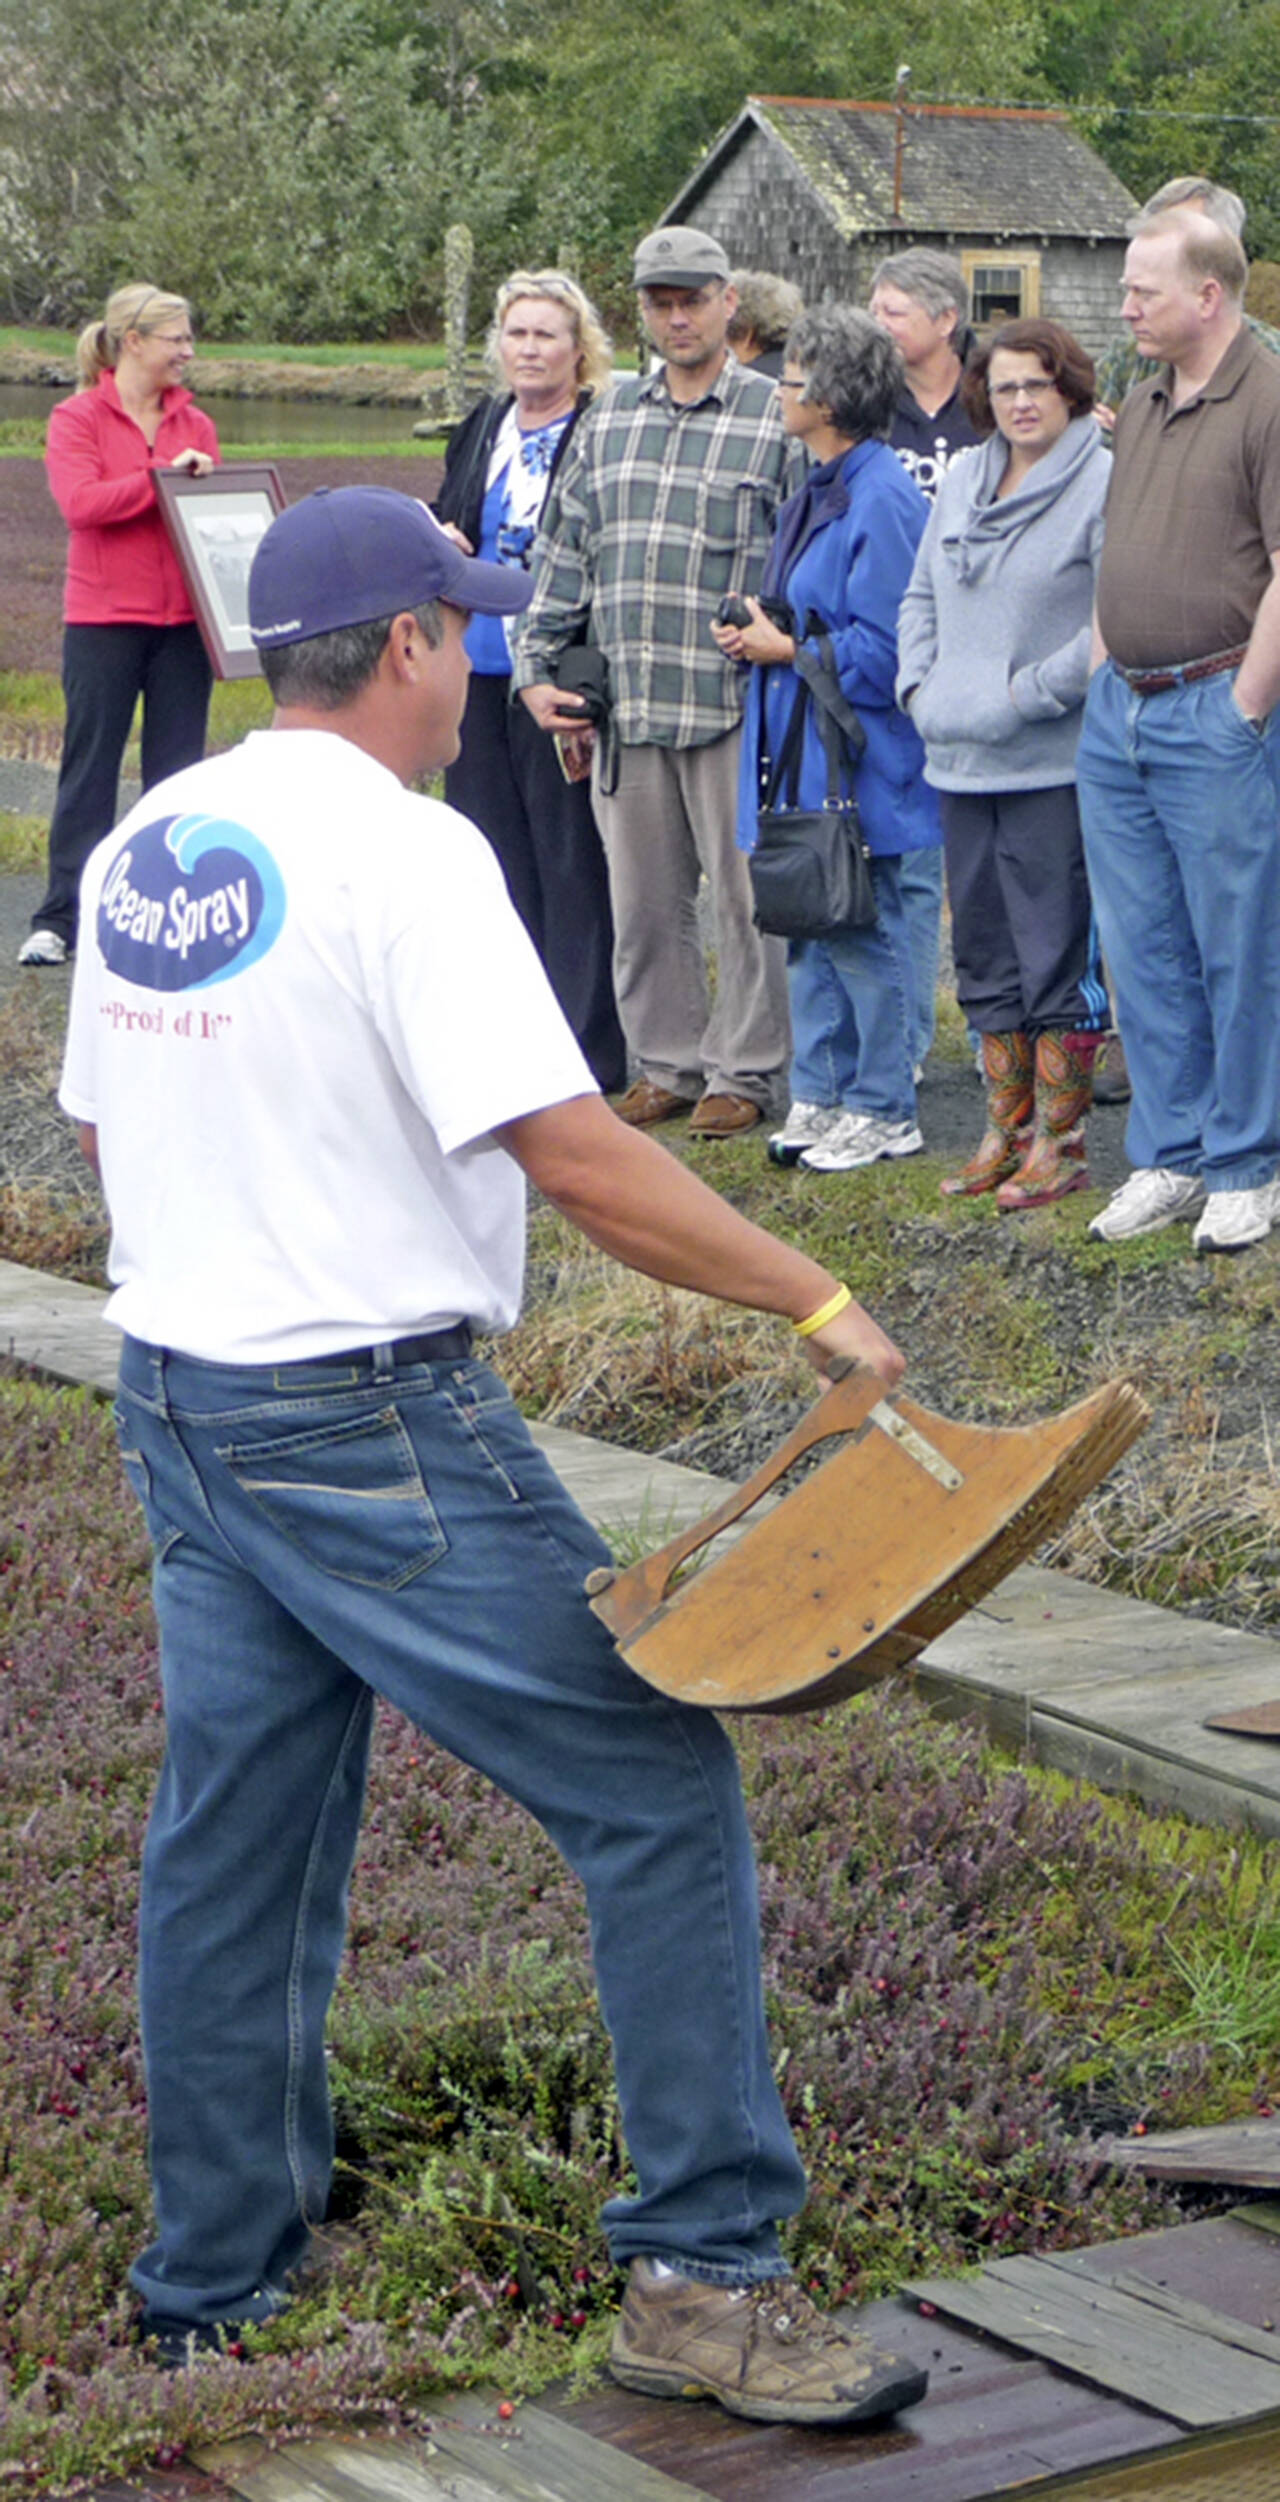 daily world File photo 
Visitors can tour cranberry bogs during the annual Cranberry Harvest Festival Saturday, Oct. 9.